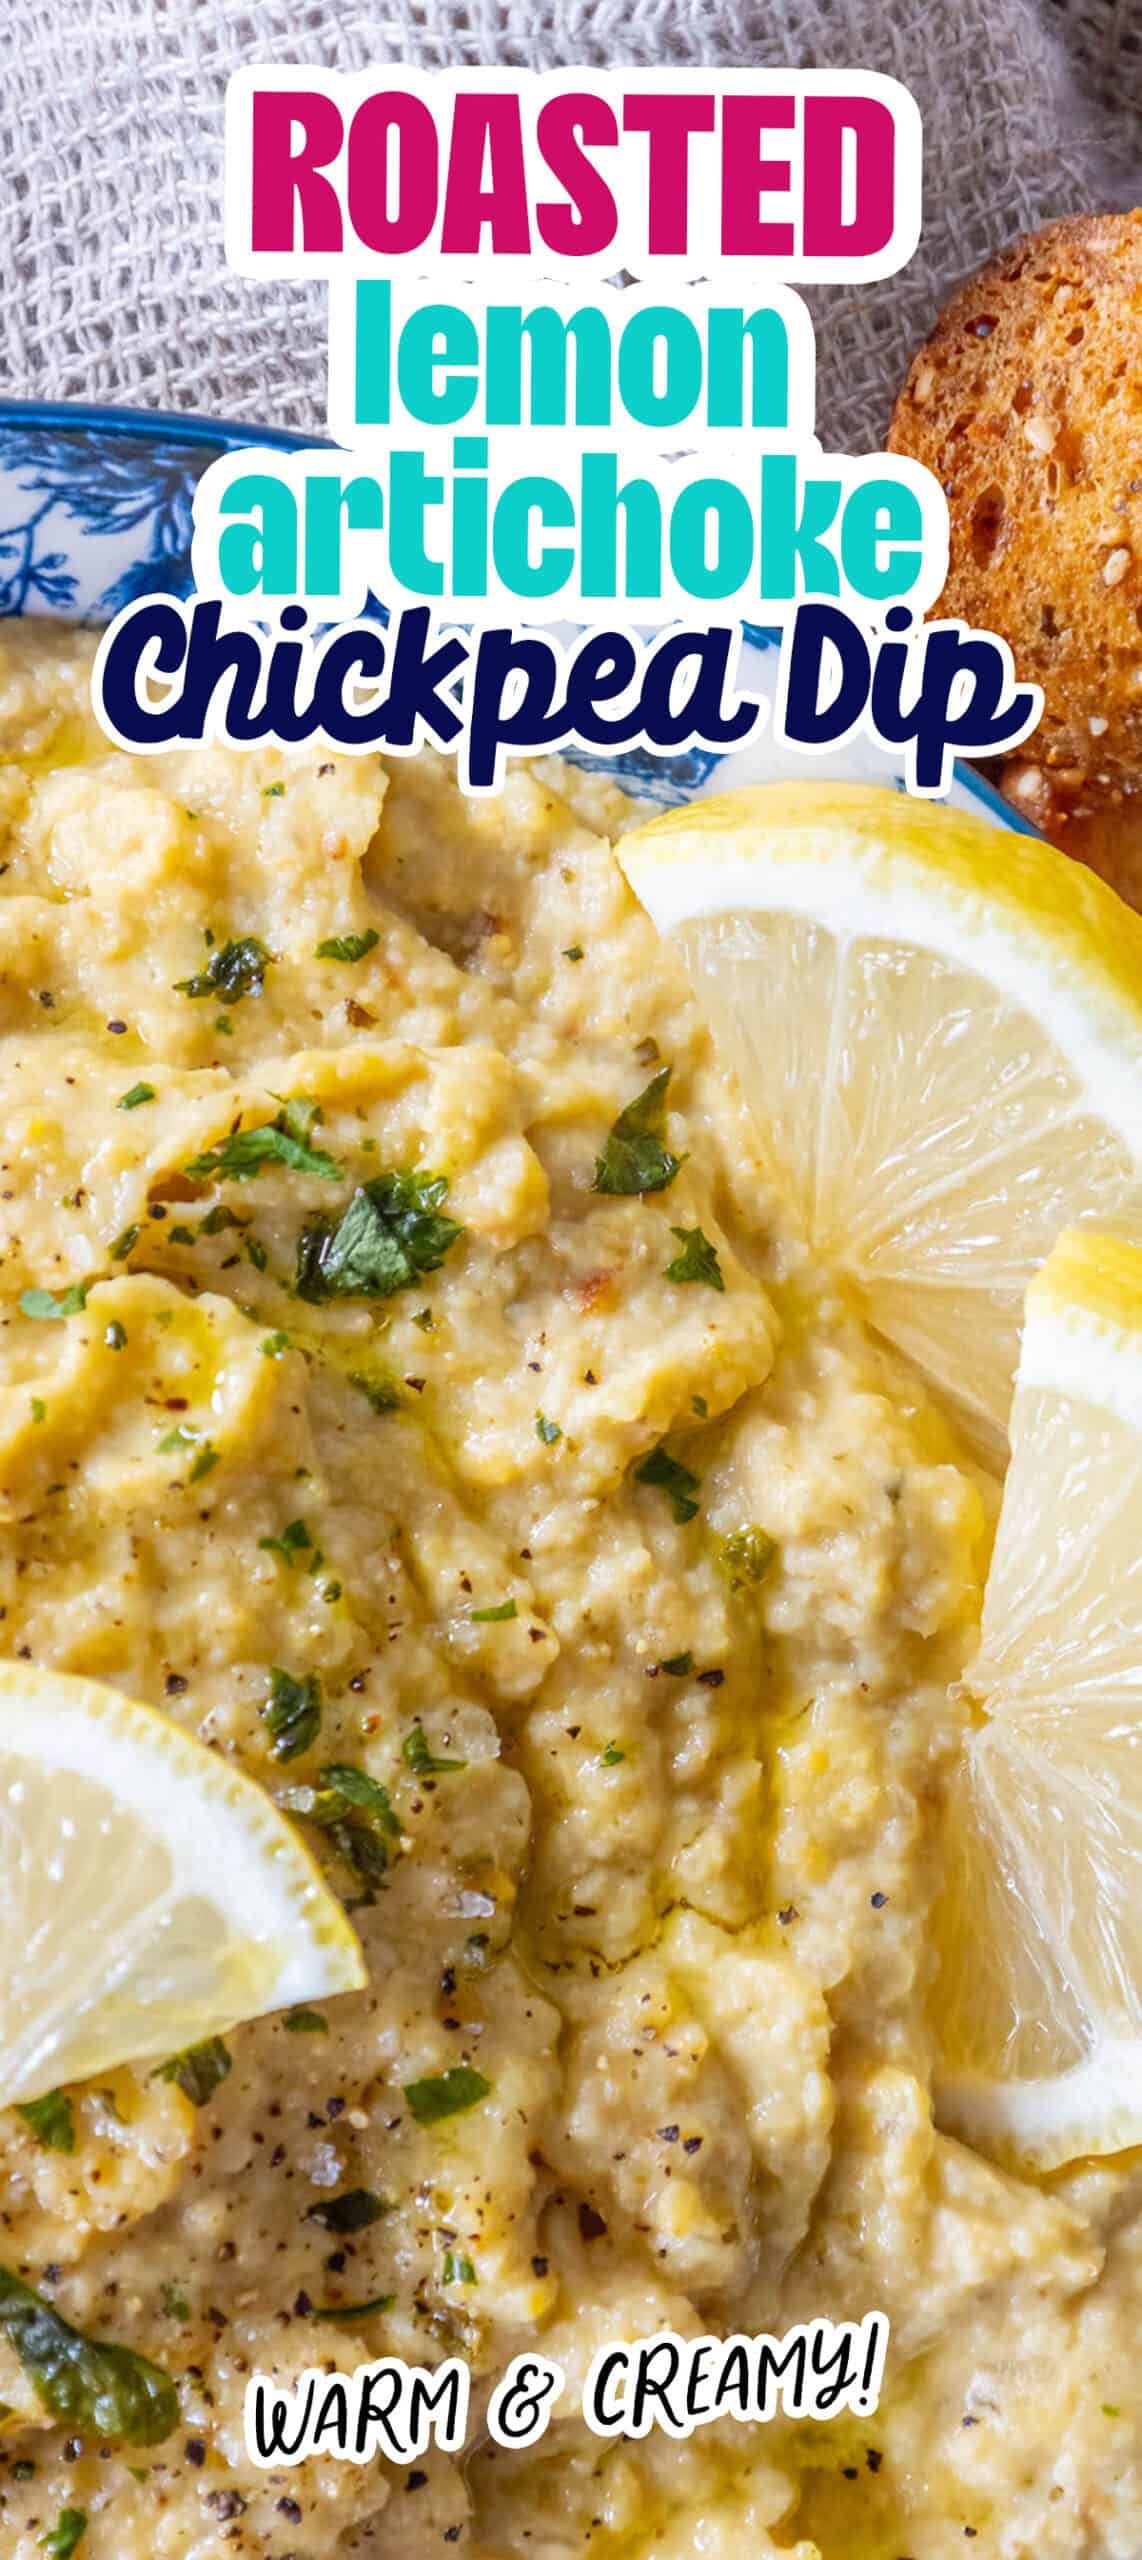 Roasted lemon artichoke dip is a flavorful and tangy appetizer that perfectly combines the taste of roasted artichoke with a hint of fresh lemon. This creamy dip is great for parties or